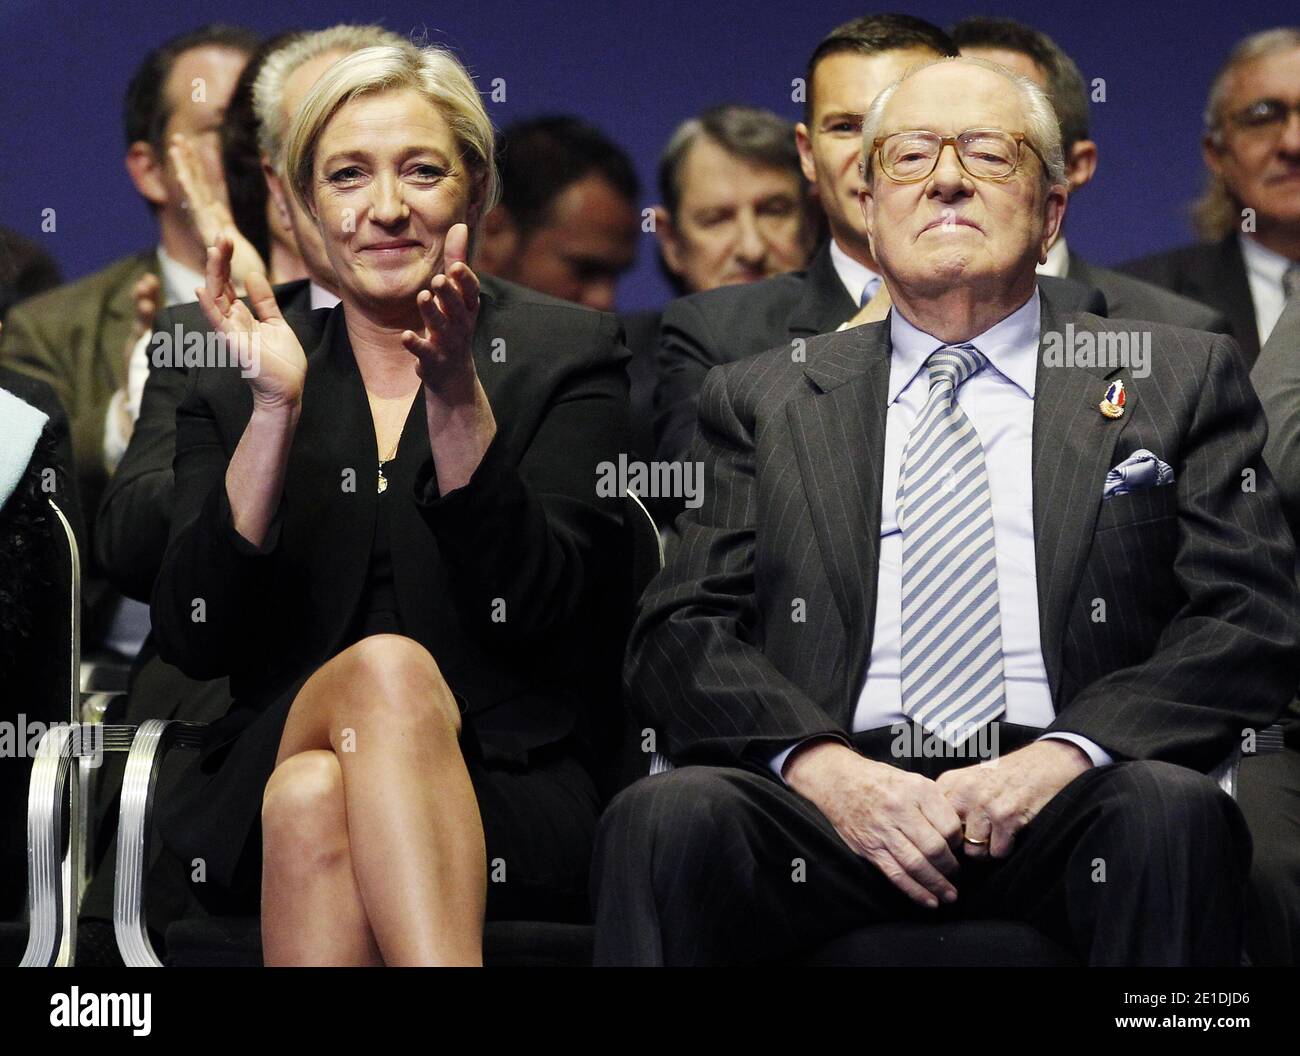 Jean-Marie Le Pen and Marine Le Pen, newly-elected France's far-right  National Front political party leader attending the 14th National Front  annual congress results ceremony in Tours, France on January 16, 2011. Photo